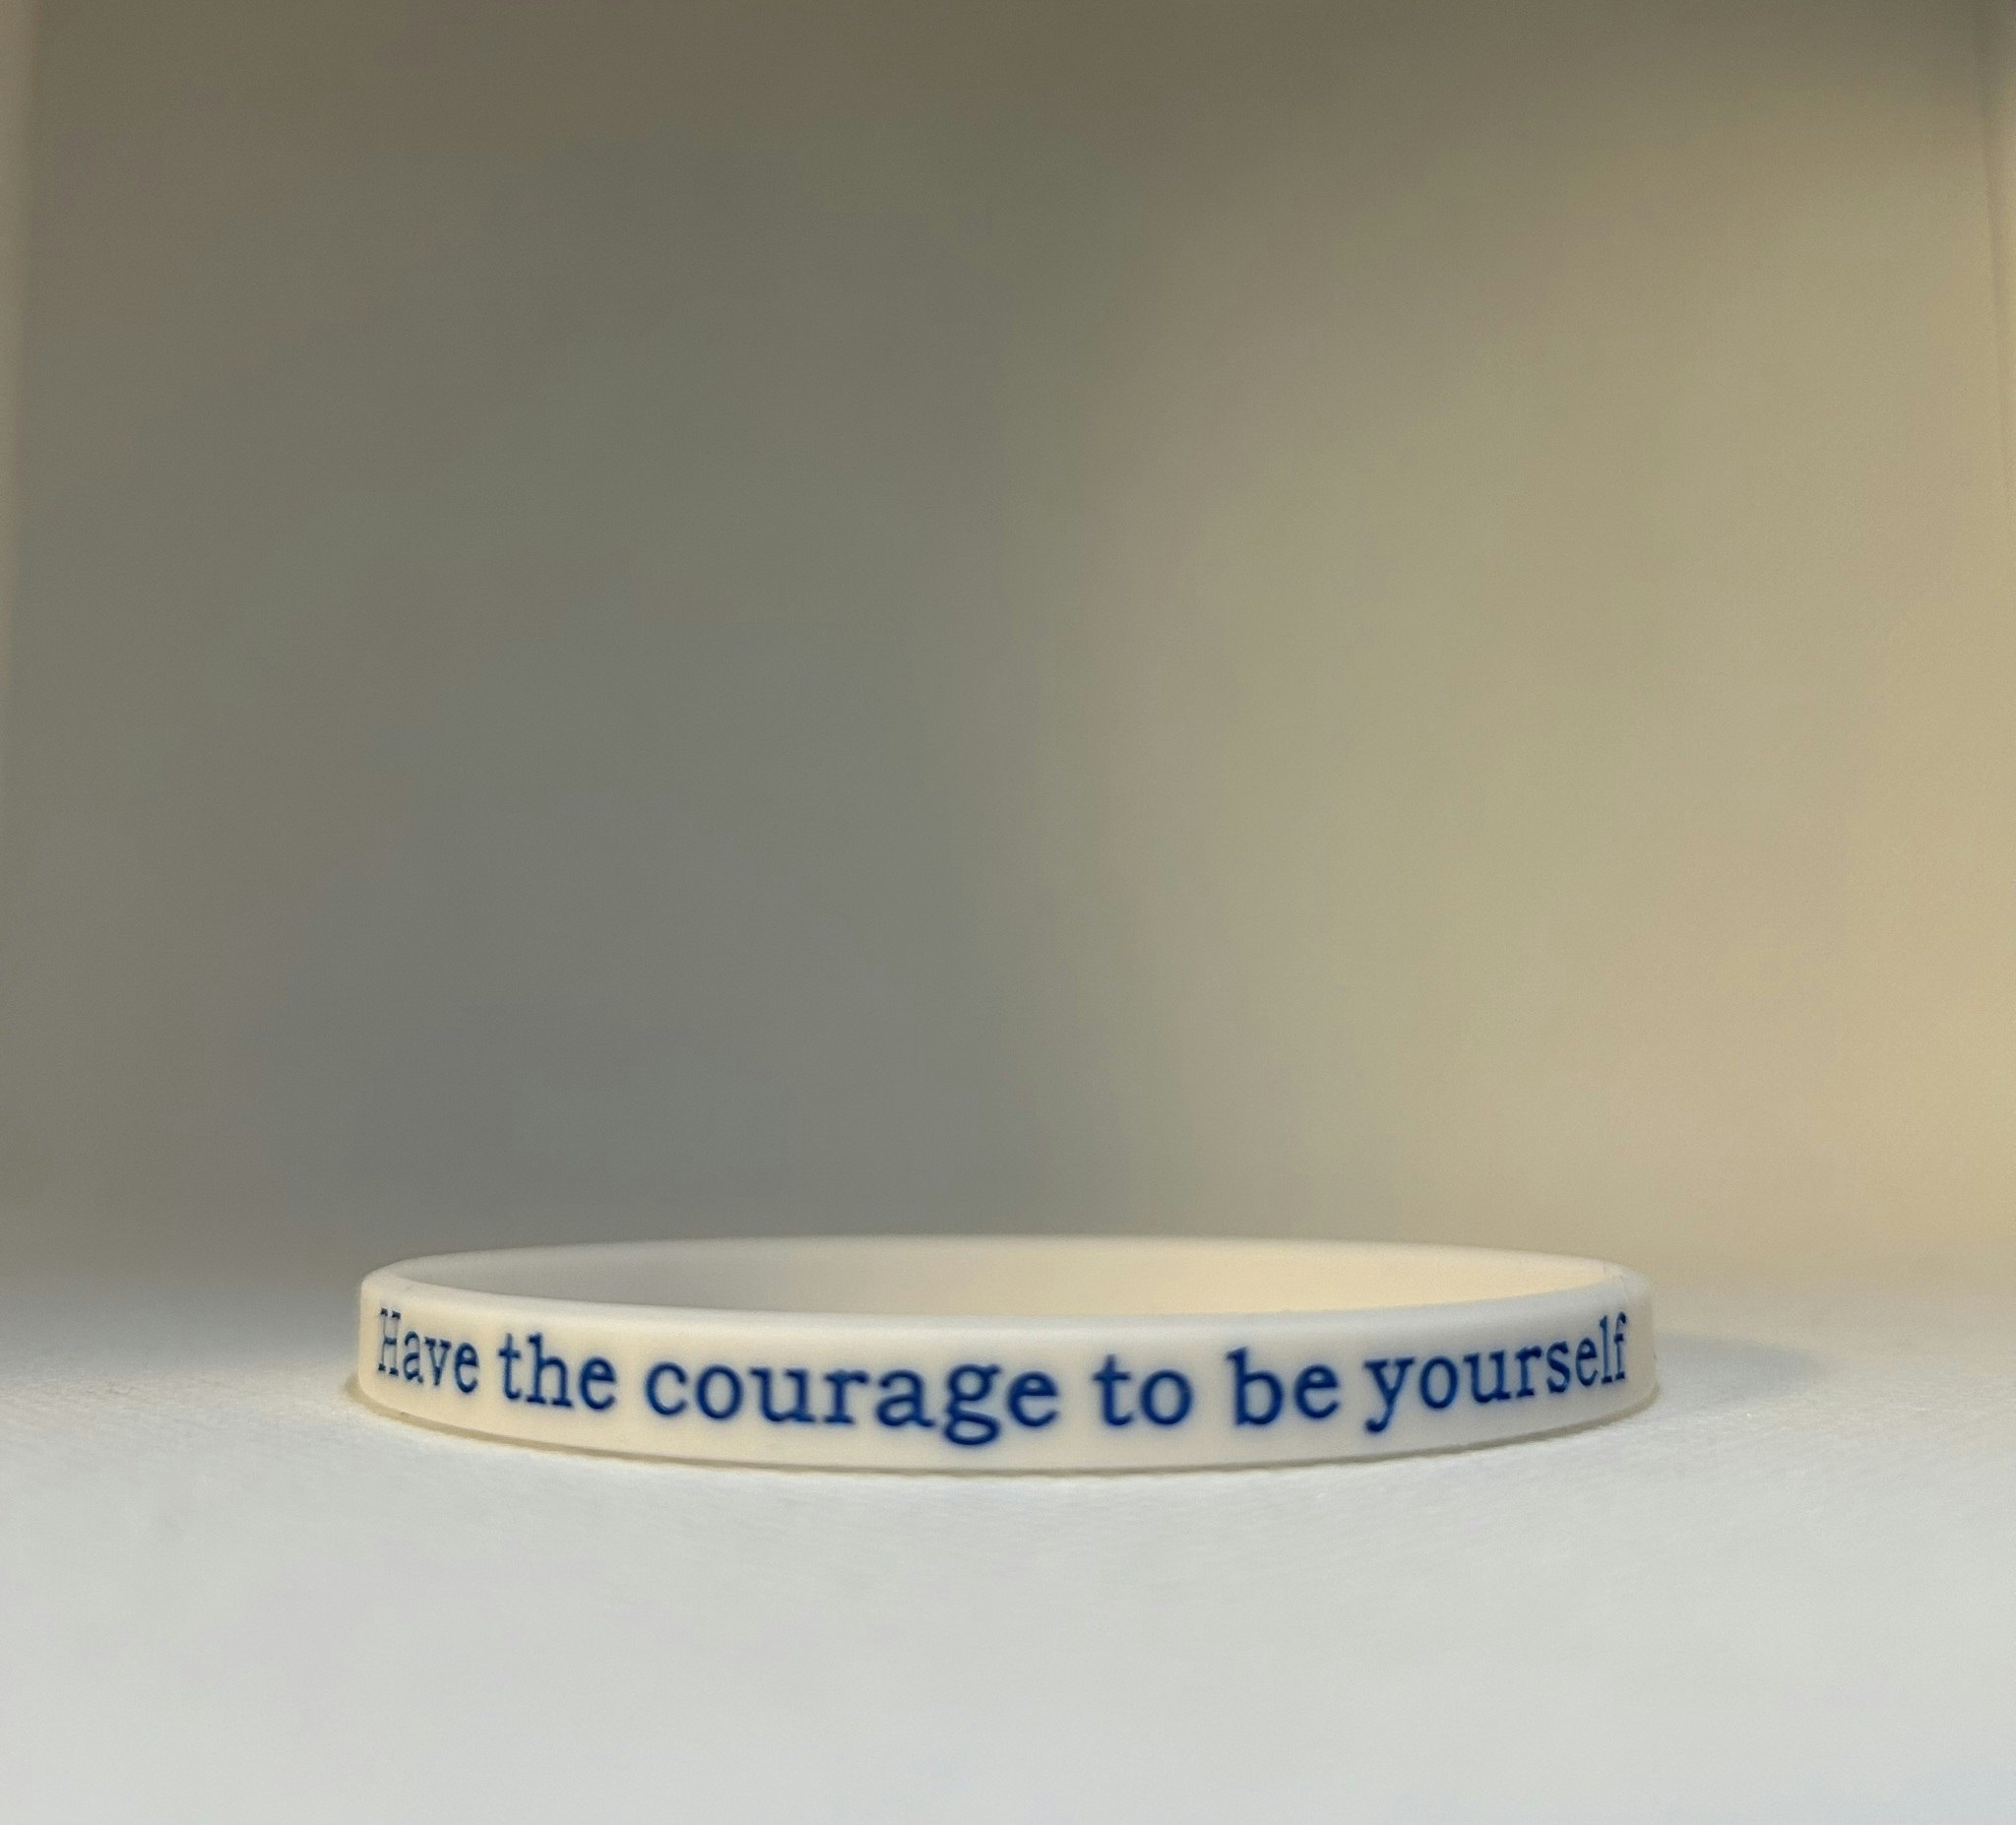 Have the courage to be yourself - Camilla Herrem